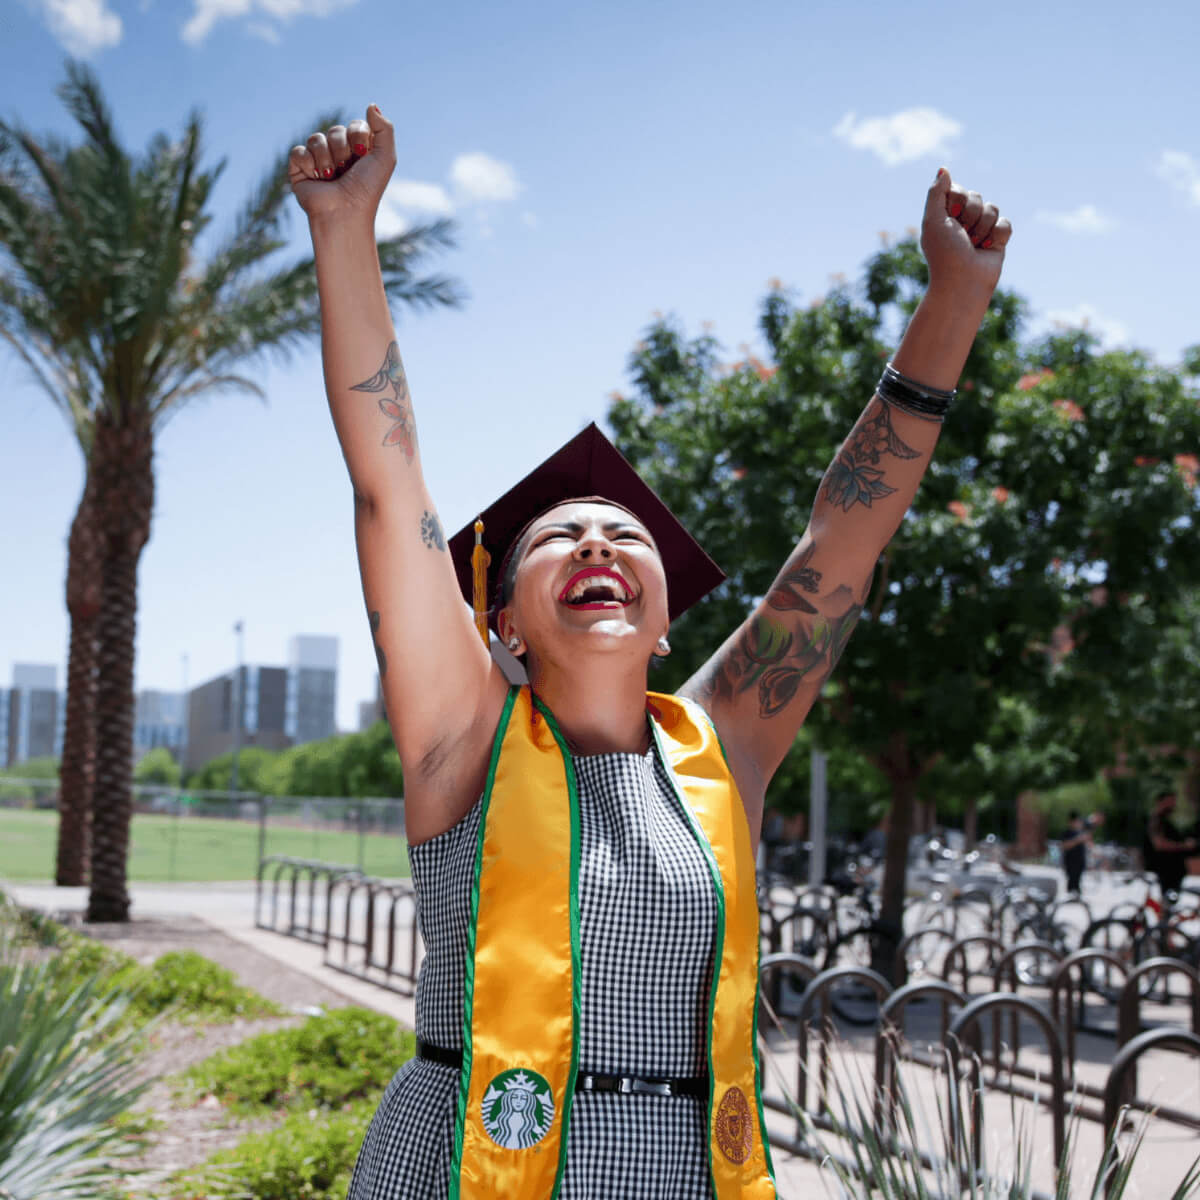 A person wearing a maroon ASU cap and gown adorned with a yellow sash, displaying both the University of Arizona and Starbucks logos, smiles.